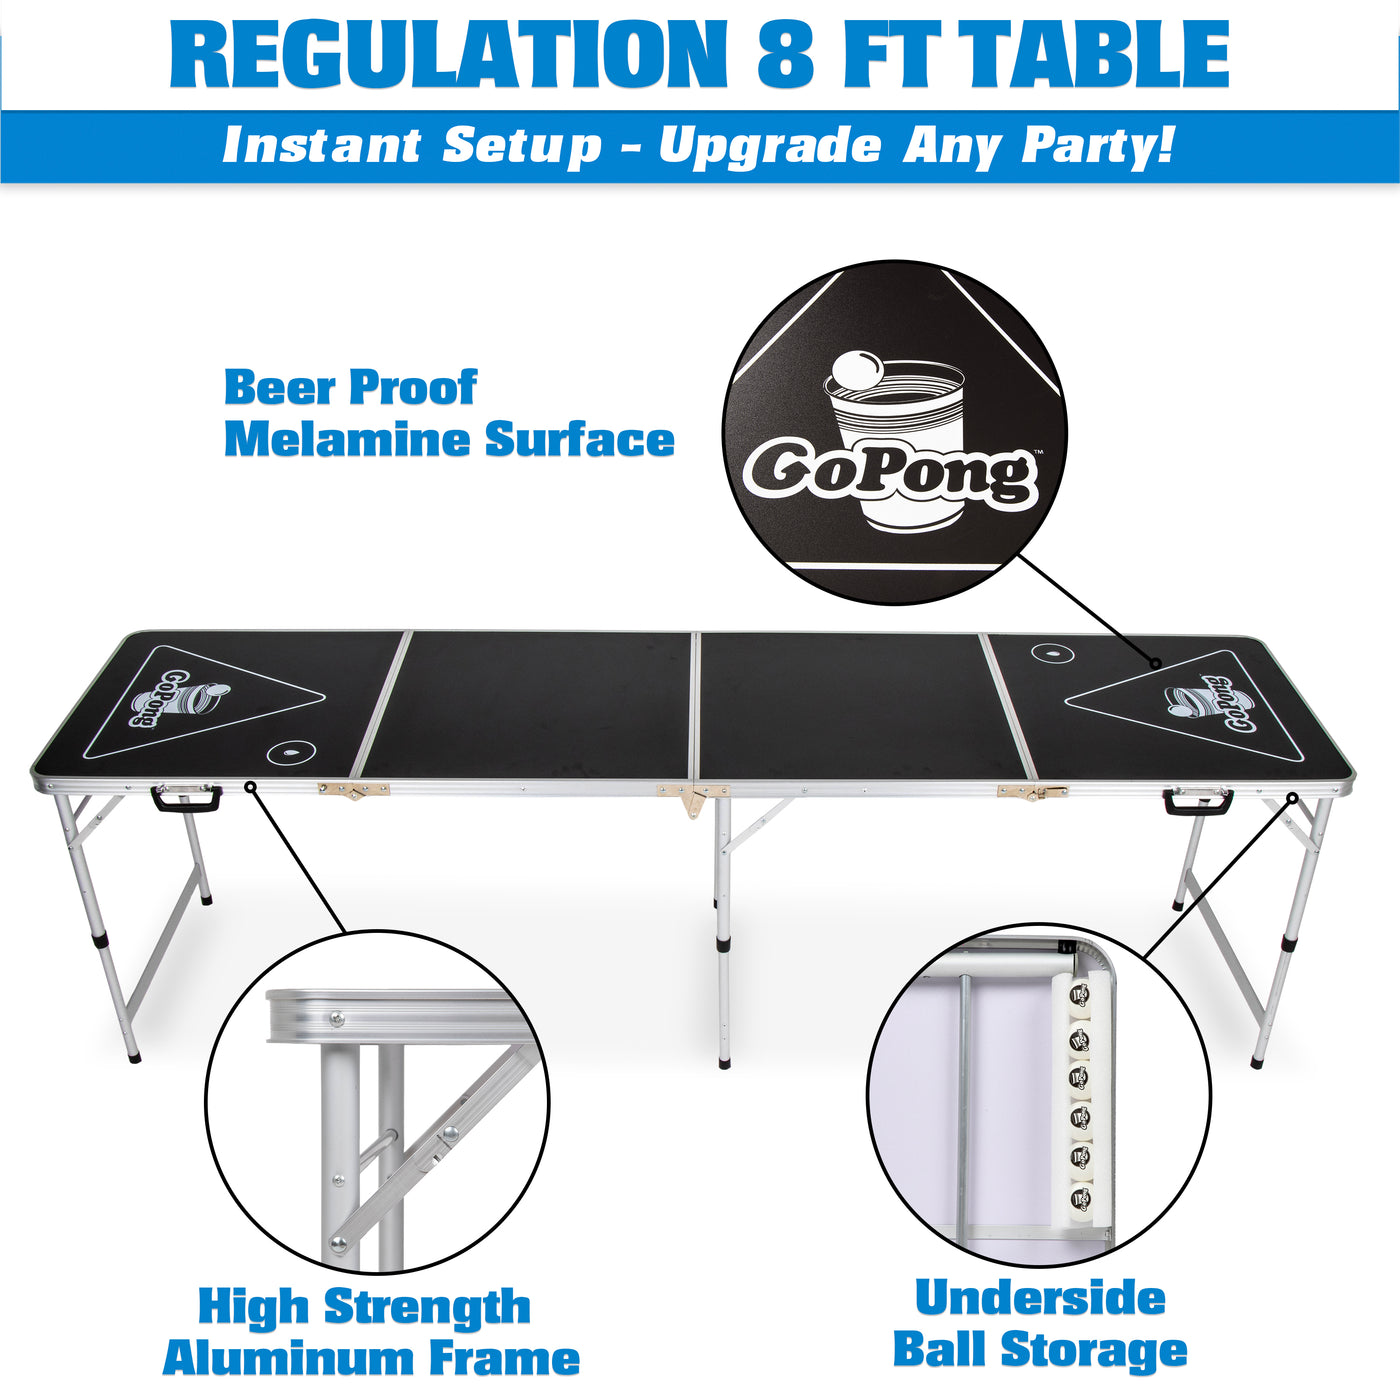 Portable Beer Pong Table –